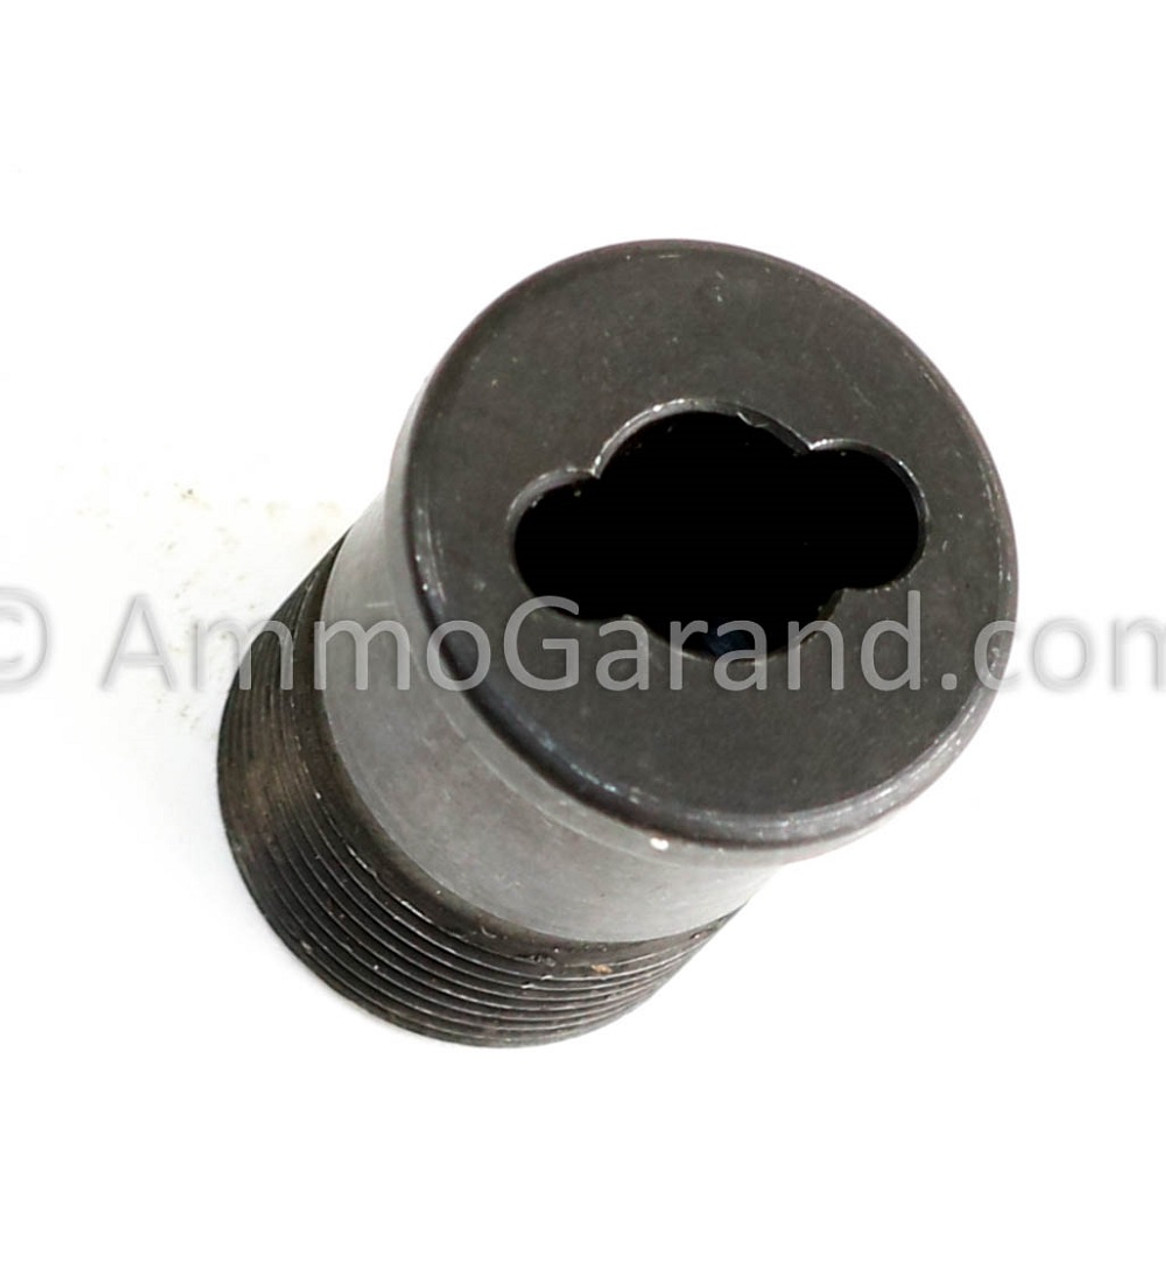 M1 Garand Single Slot Gas Cylinder Screw  - Springfield SA Style - New - Replacement